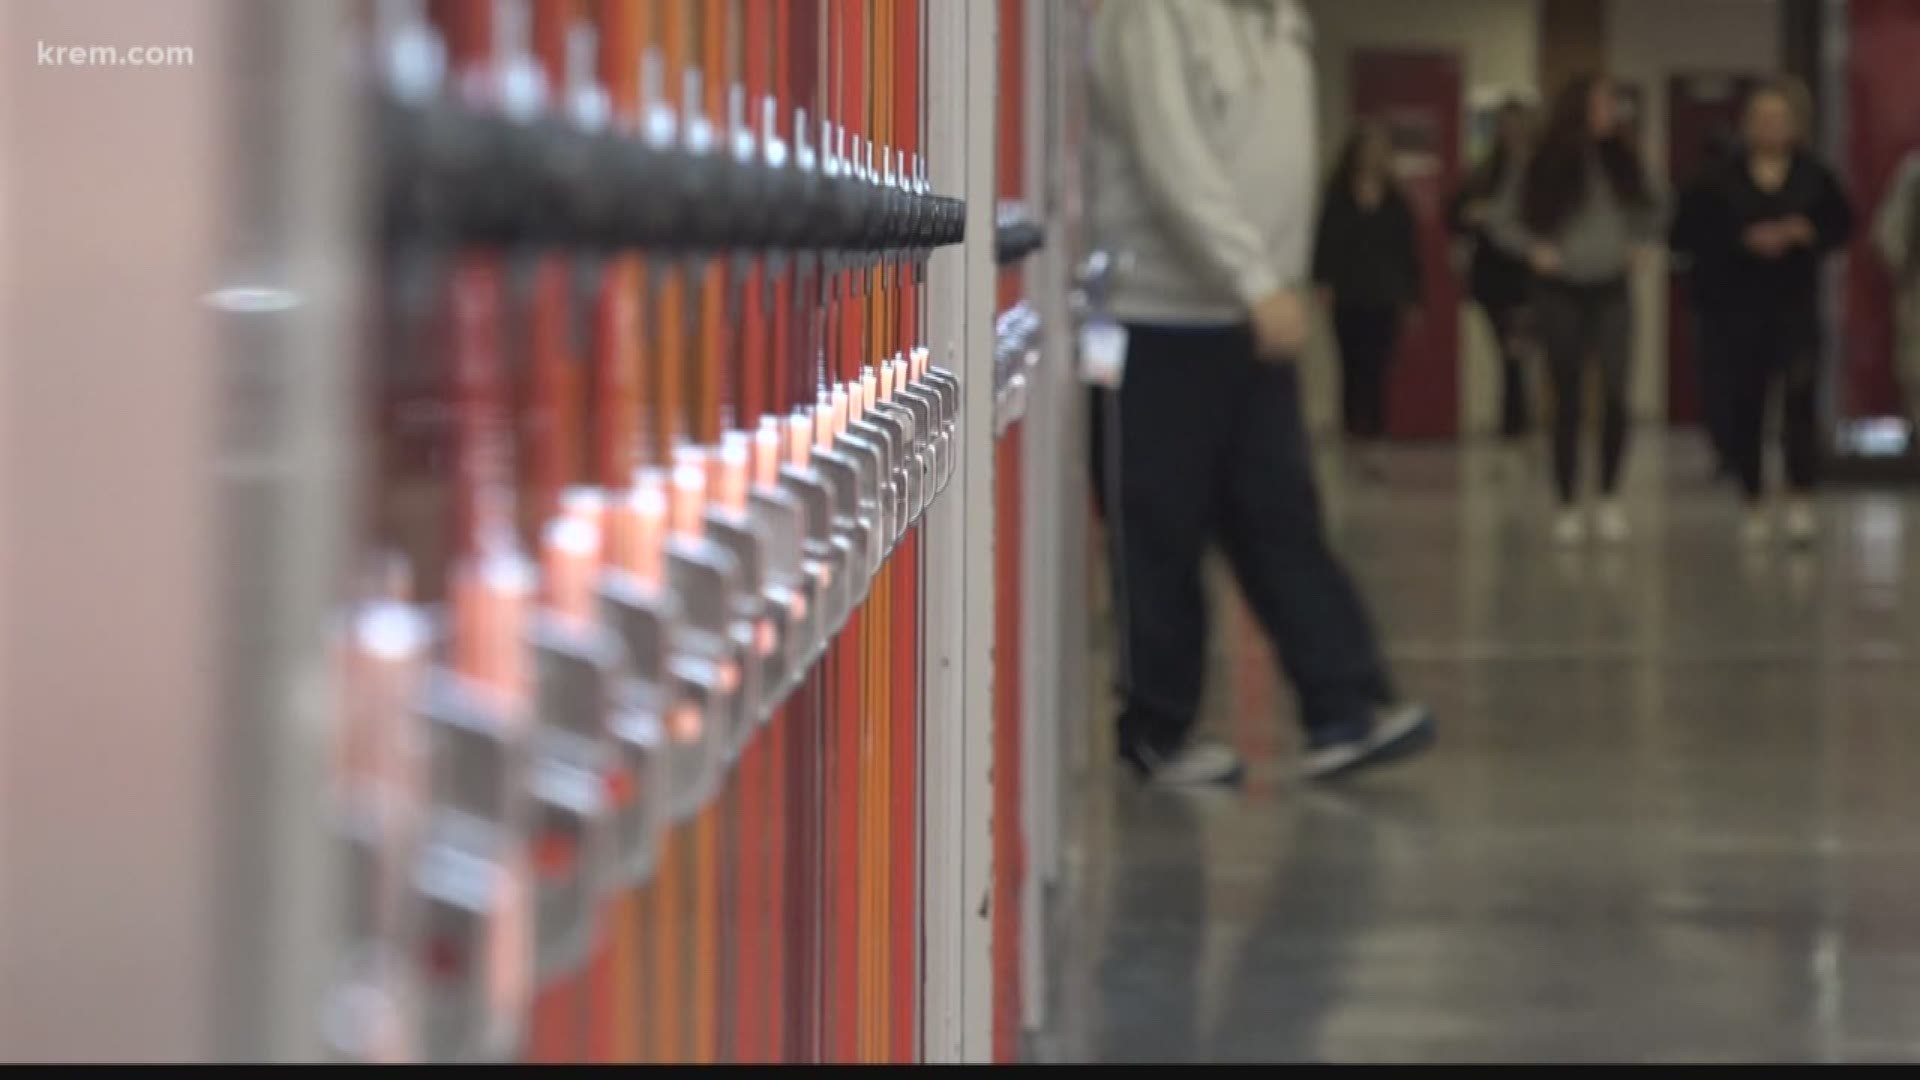 KREM's Shayna Waltower explains how the new Spokane Public Schools budget for the 2019-2020 school year calls for all elementary schools to have early release on Fridays.